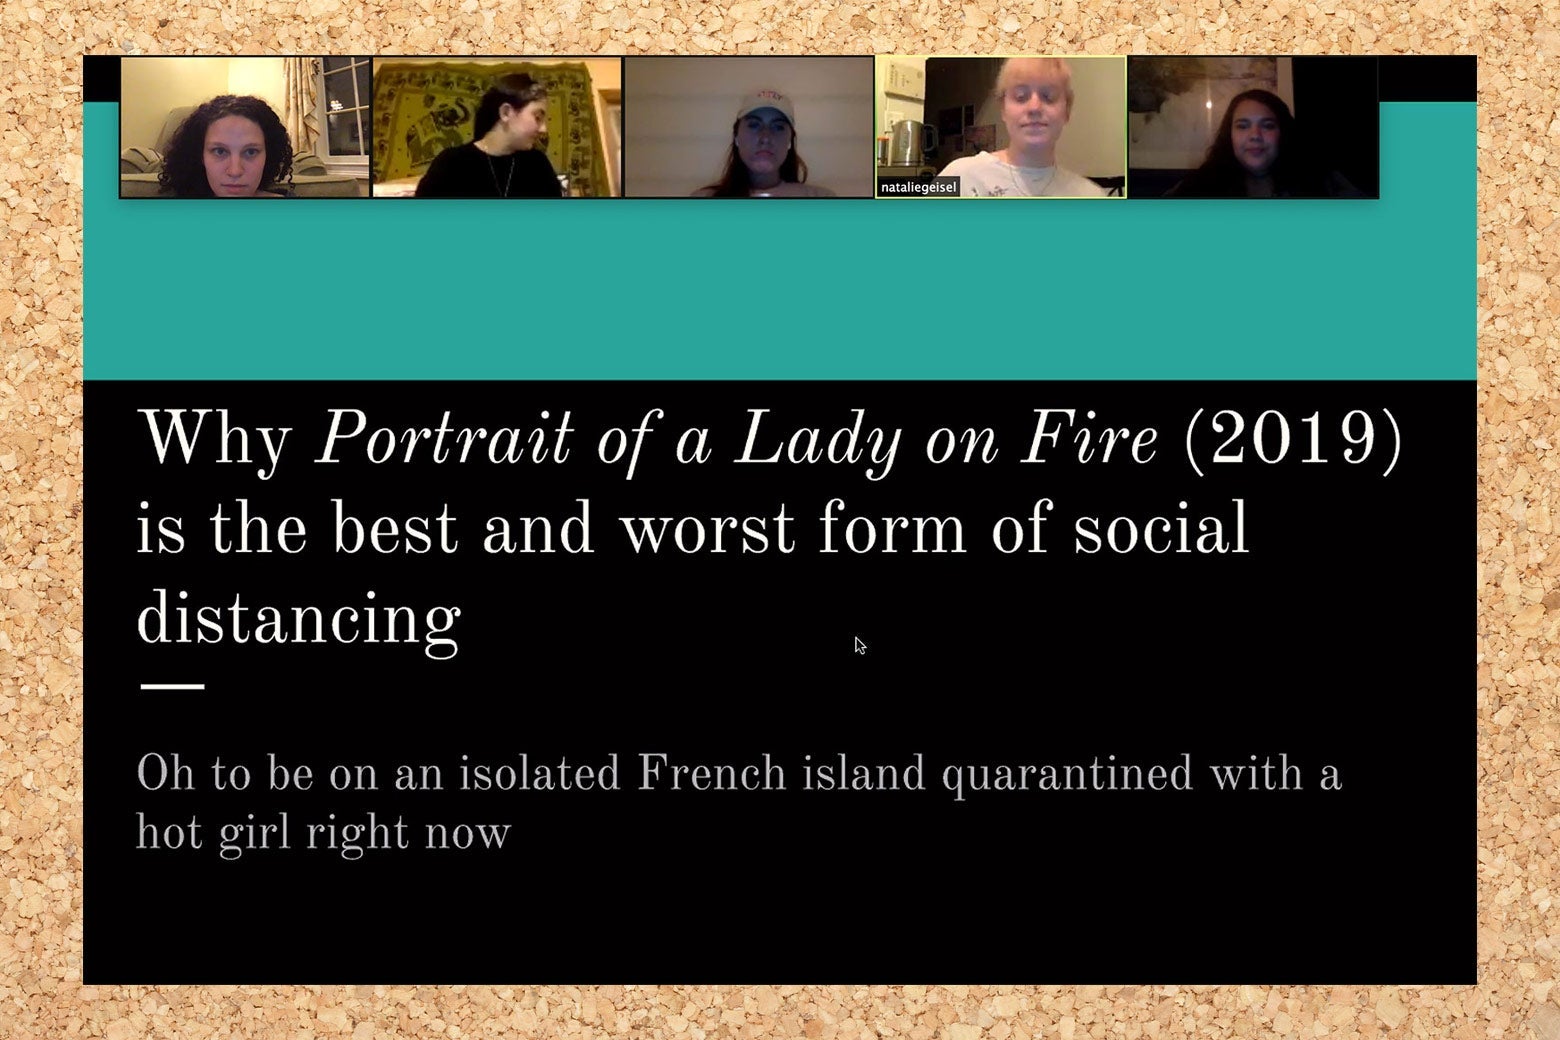 A powerpoint screengrab that says "Why Portrait of a Lady Is the Best and Worst Form of Social Distancing."